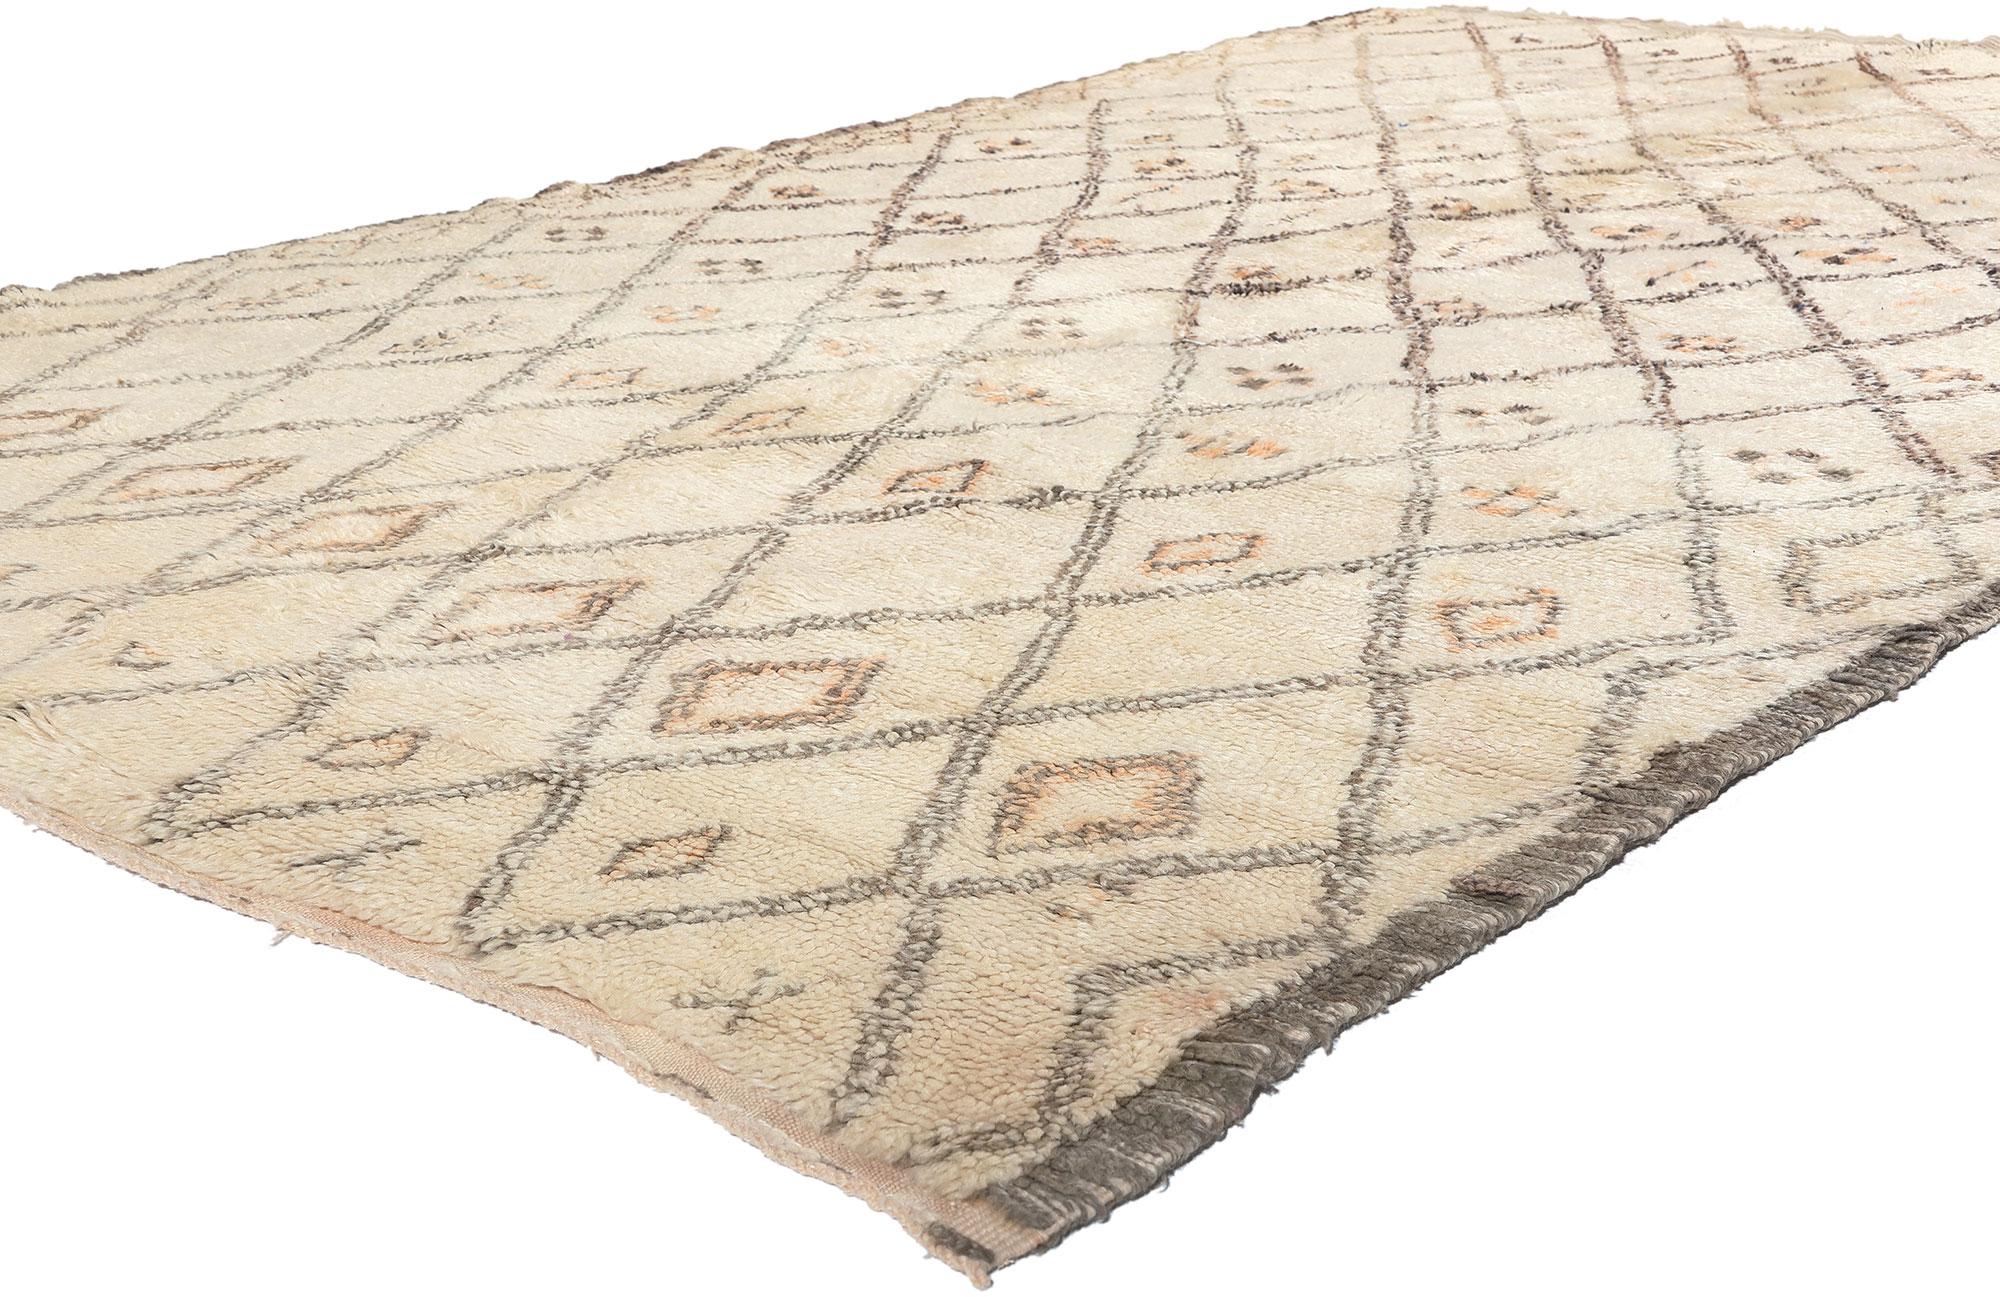 21400 Vintage Beni Ourain Moroccan Rug, 05'07 x 09'09. Emerging from the rich heritage of the Beni Ourain tribe, an integral segment of Morocco's diverse Berber ethnic group, these Moroccan rugs are meticulously fashioned from natural, undyed